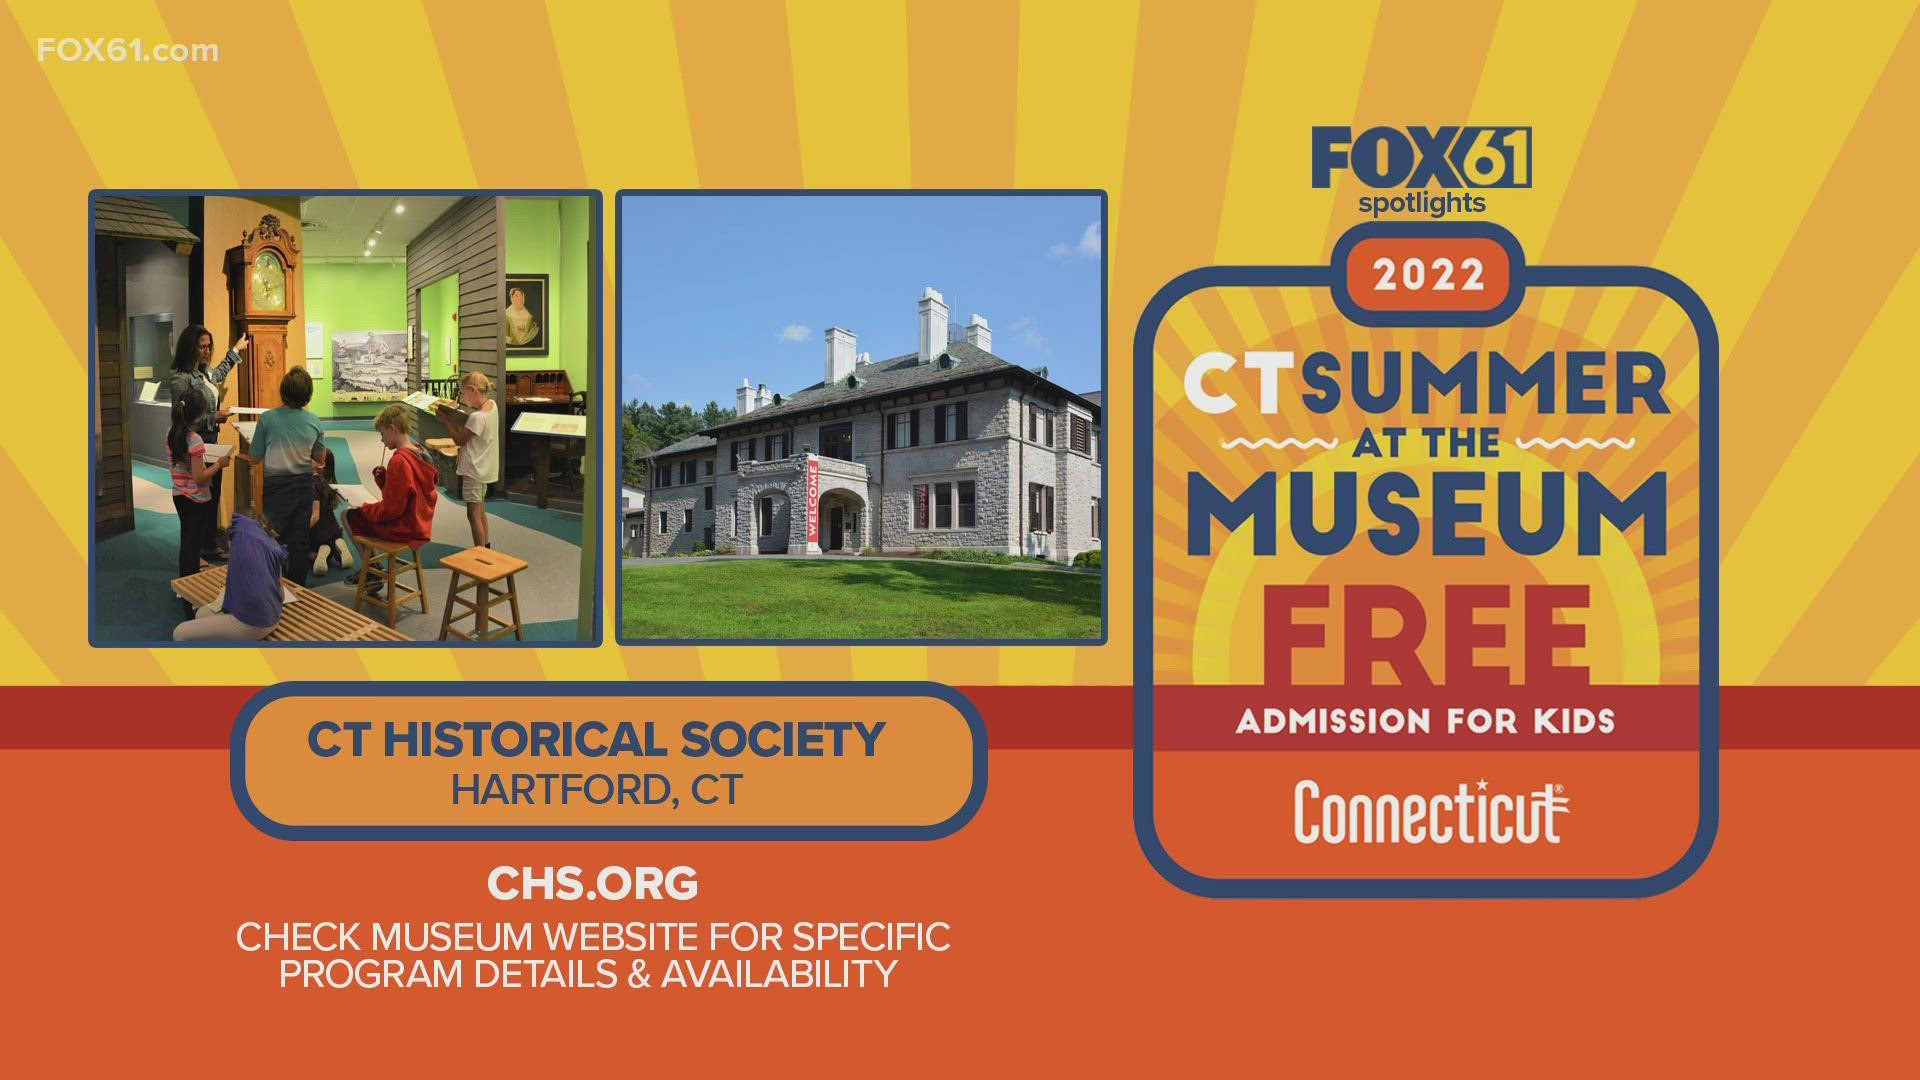 Kids 18 and under can visit the CT Historical Society in Hartford for free with an adult who is a resident of Connecticut. It runs through Sept. 5.